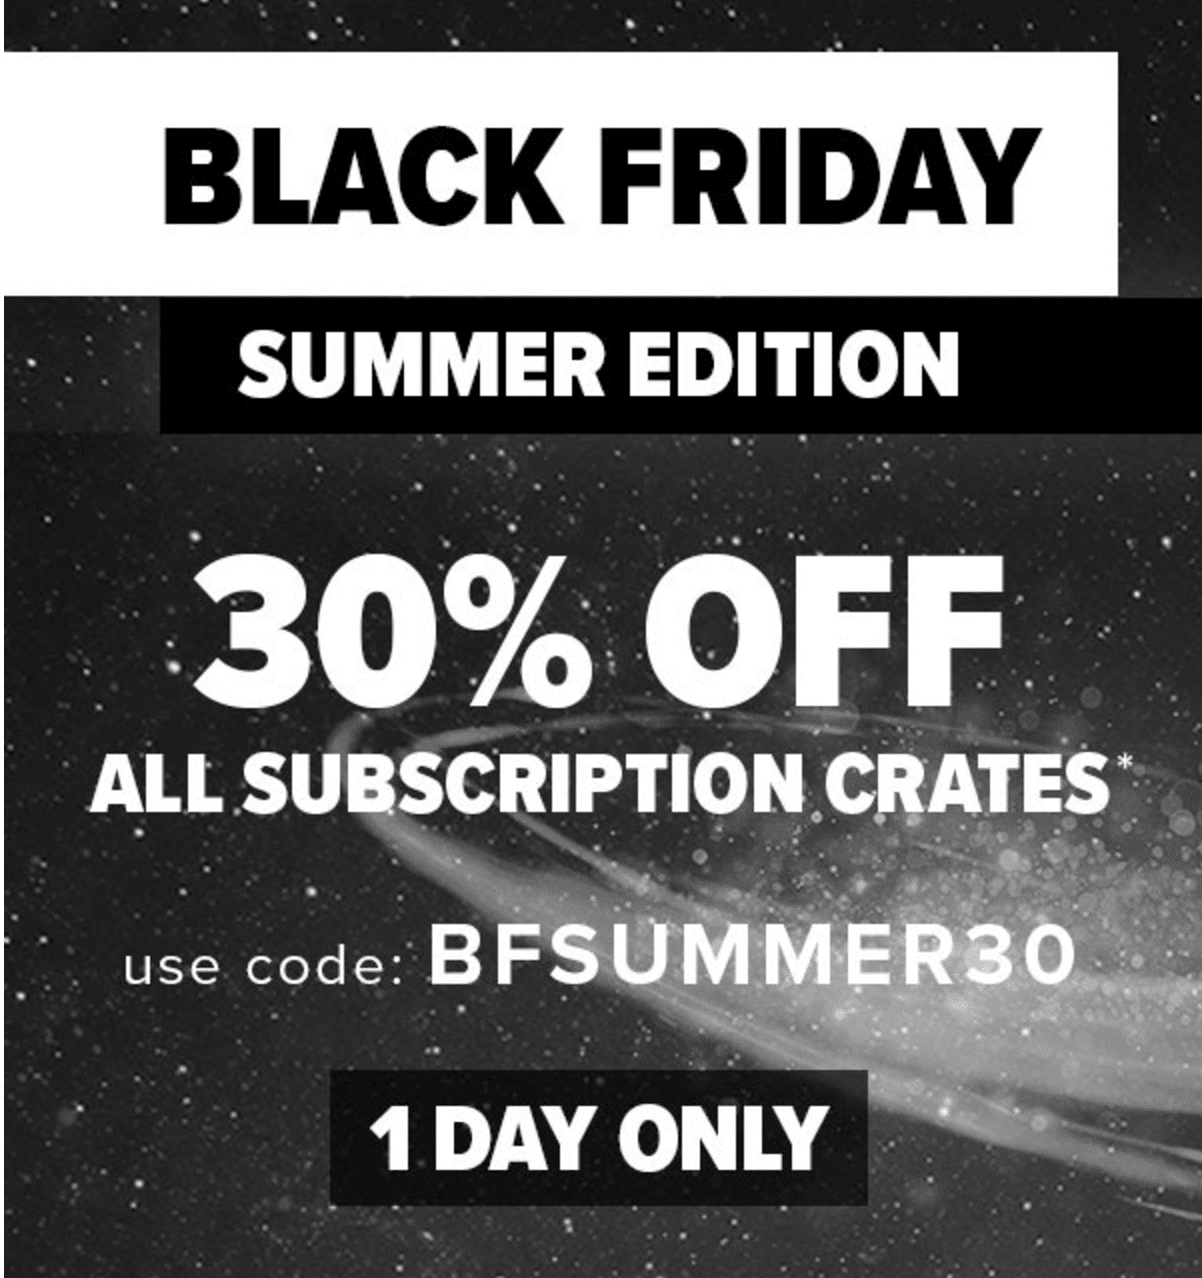 Extended! Loot Crate Summer Black Friday Sale – Save 30% Off ALL Subscriptions!